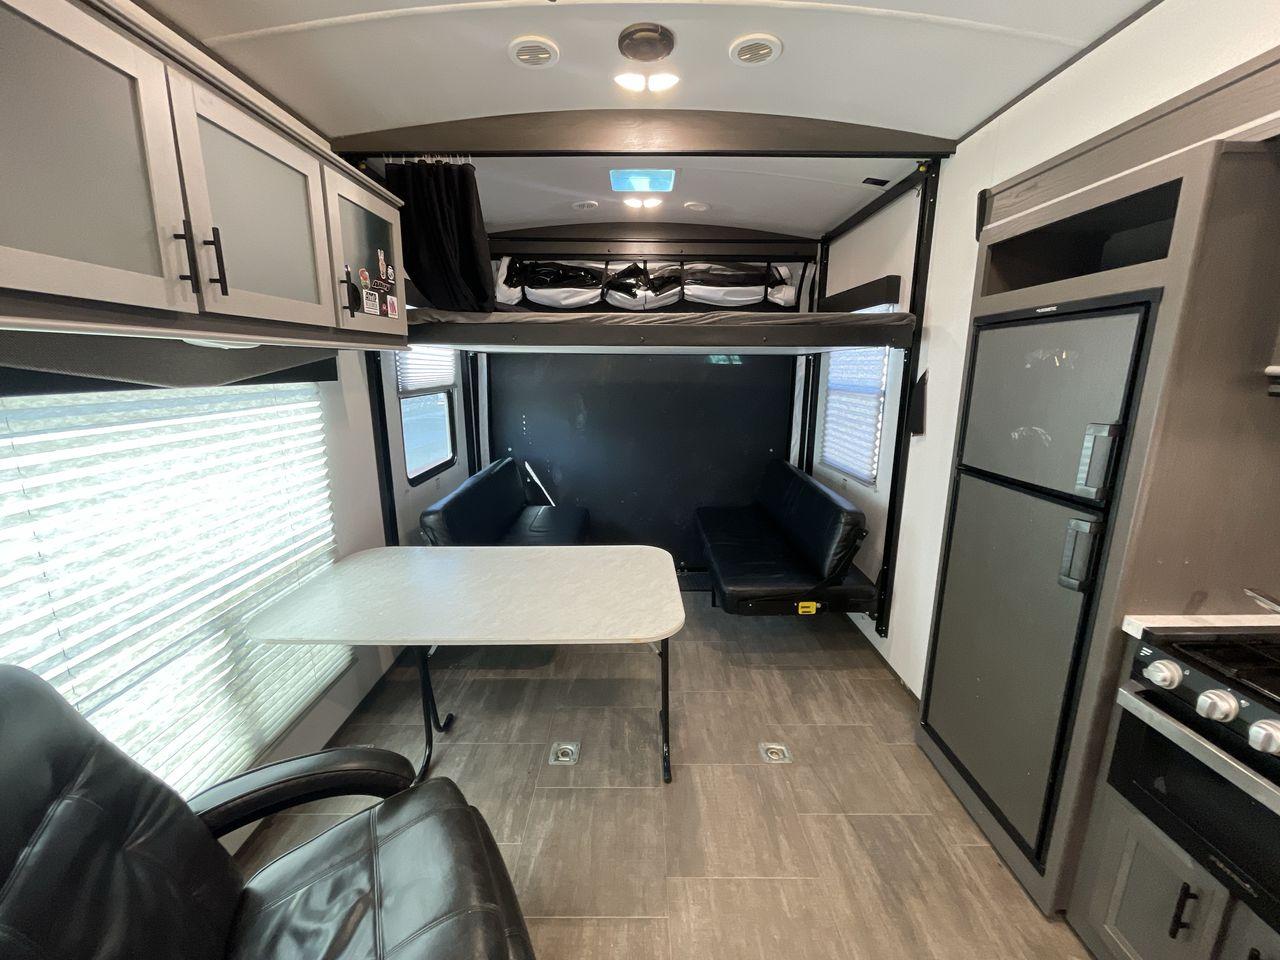 2021 CRUISER RV STRYKER 3414 (5RXGB392XM1) , Length: 38.75 ft. | Dry Weight: 9,608 lbs. | Gross Weight: 12,800 lbs. | Slides: 2 transmission, located at 4319 N Main Street, Cleburne, TX, 76033, (817) 221-0660, 32.435829, -97.384178 - The 2021 Cruiser RV Stryker 3414 is a meticulously crafted toy hauler that seamlessly integrates luxury, versatility, and durability to provide an exceptional on-the-road experience. Whether you're a passionate thrill-seeker indulging in outdoor sports or a discerning family seeking comfort, the Str - Photo #12